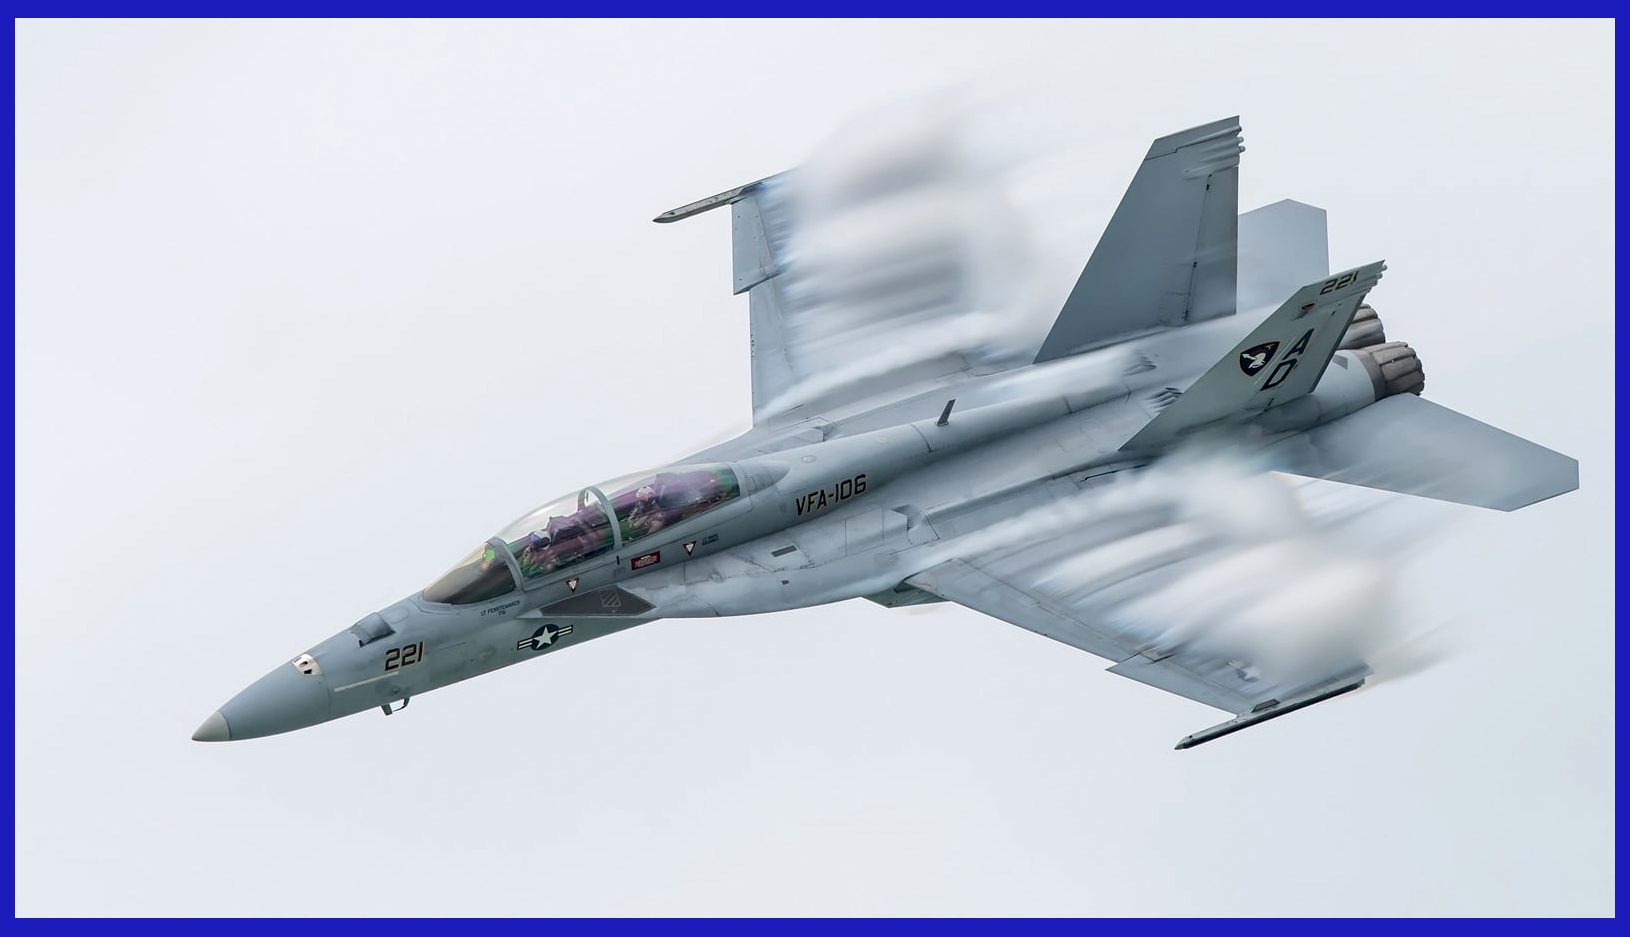 Photo Credit: Hesja Air-Art Photography / Roaring Majesty: The Boeing F/A-18F Super Hornet Dominates the Skies in an Air Show